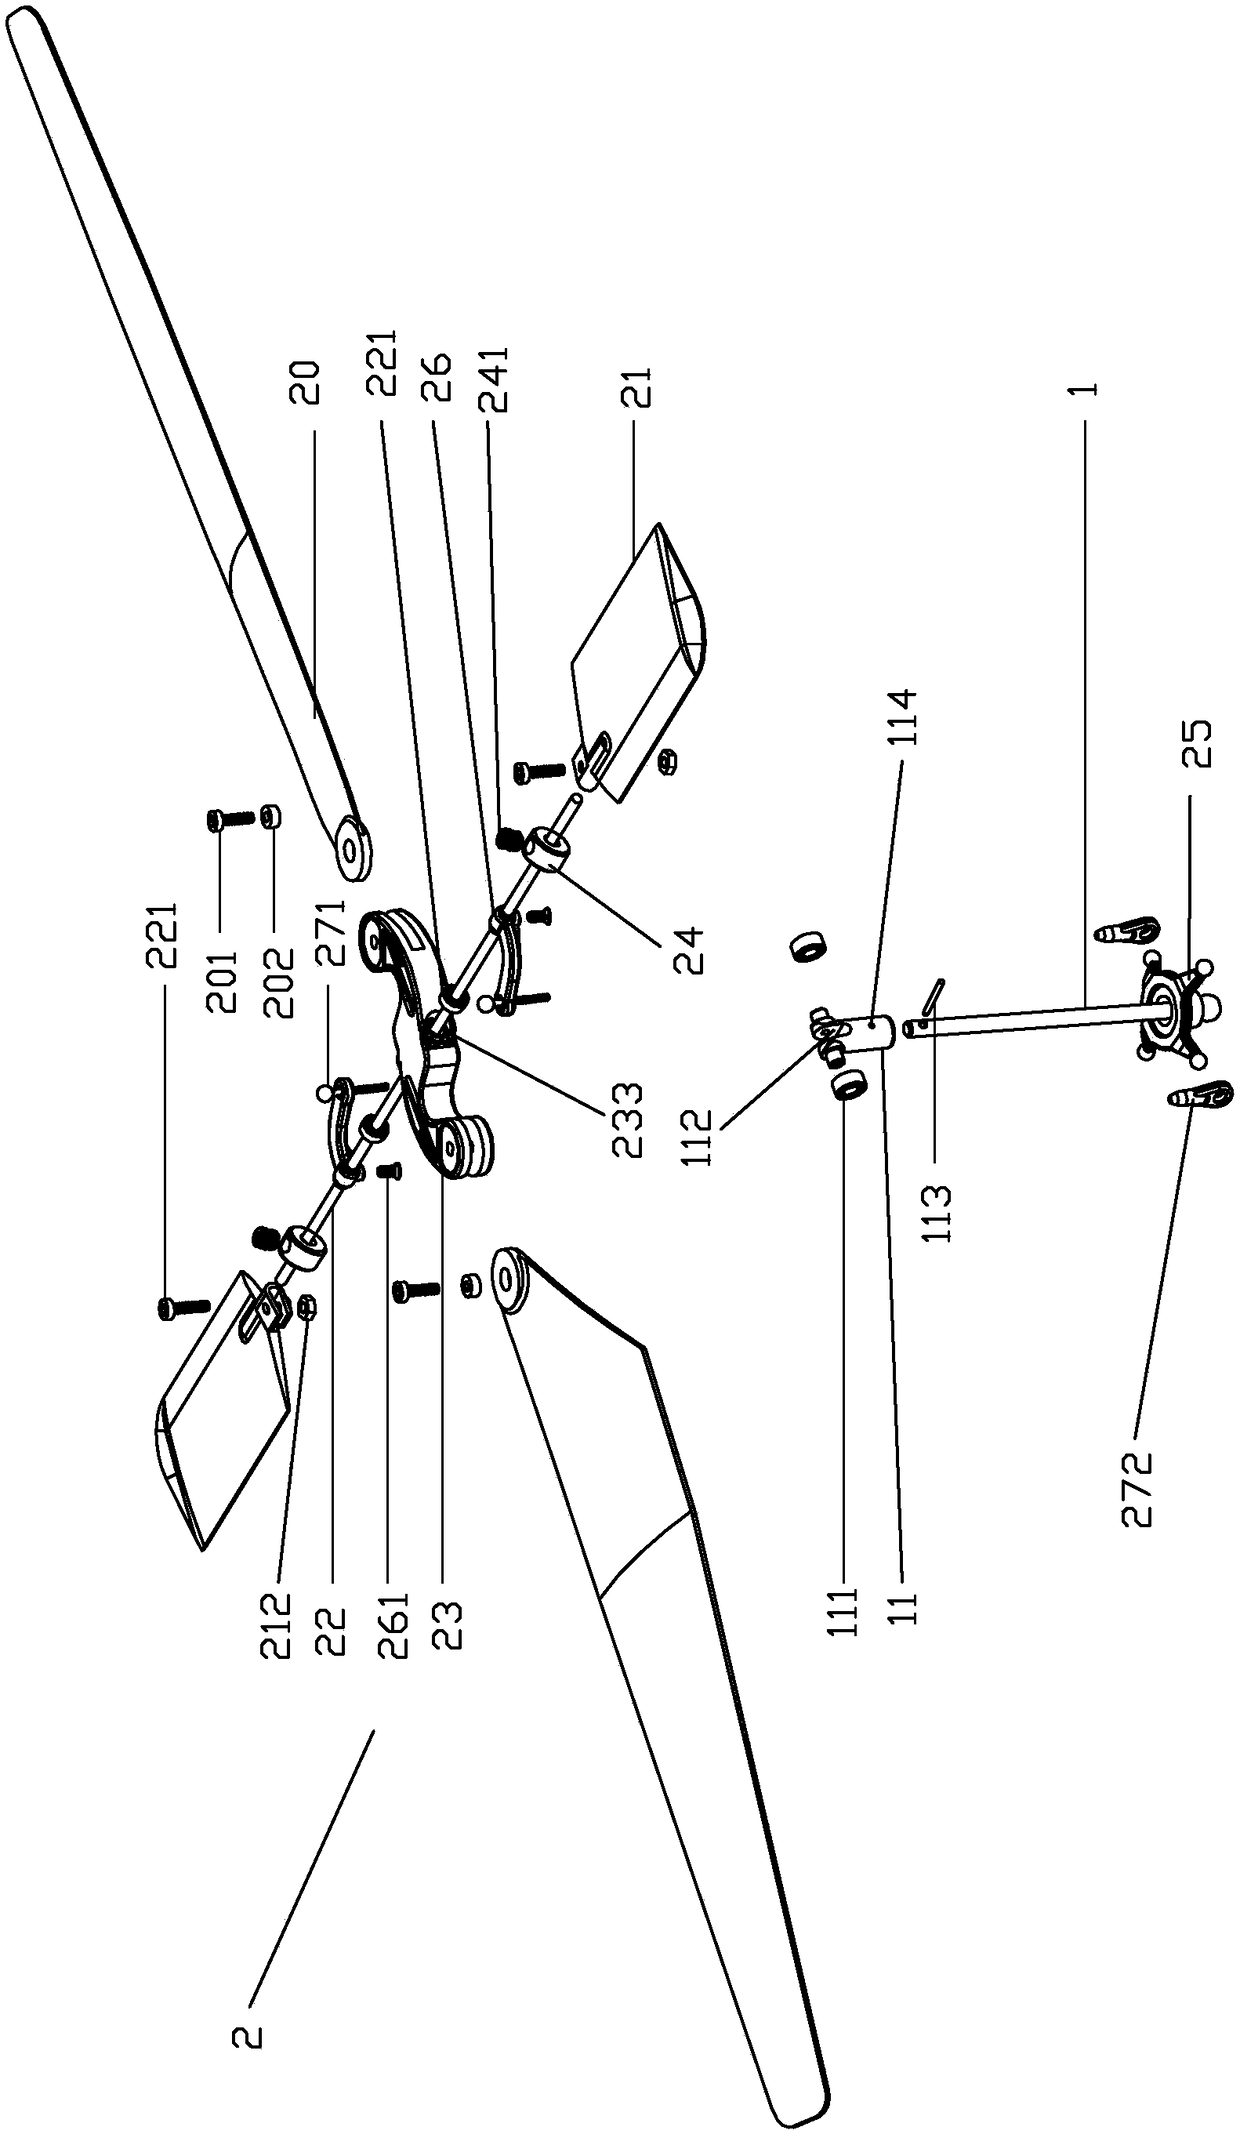 Aircraft model with auxiliary leveling blade control system